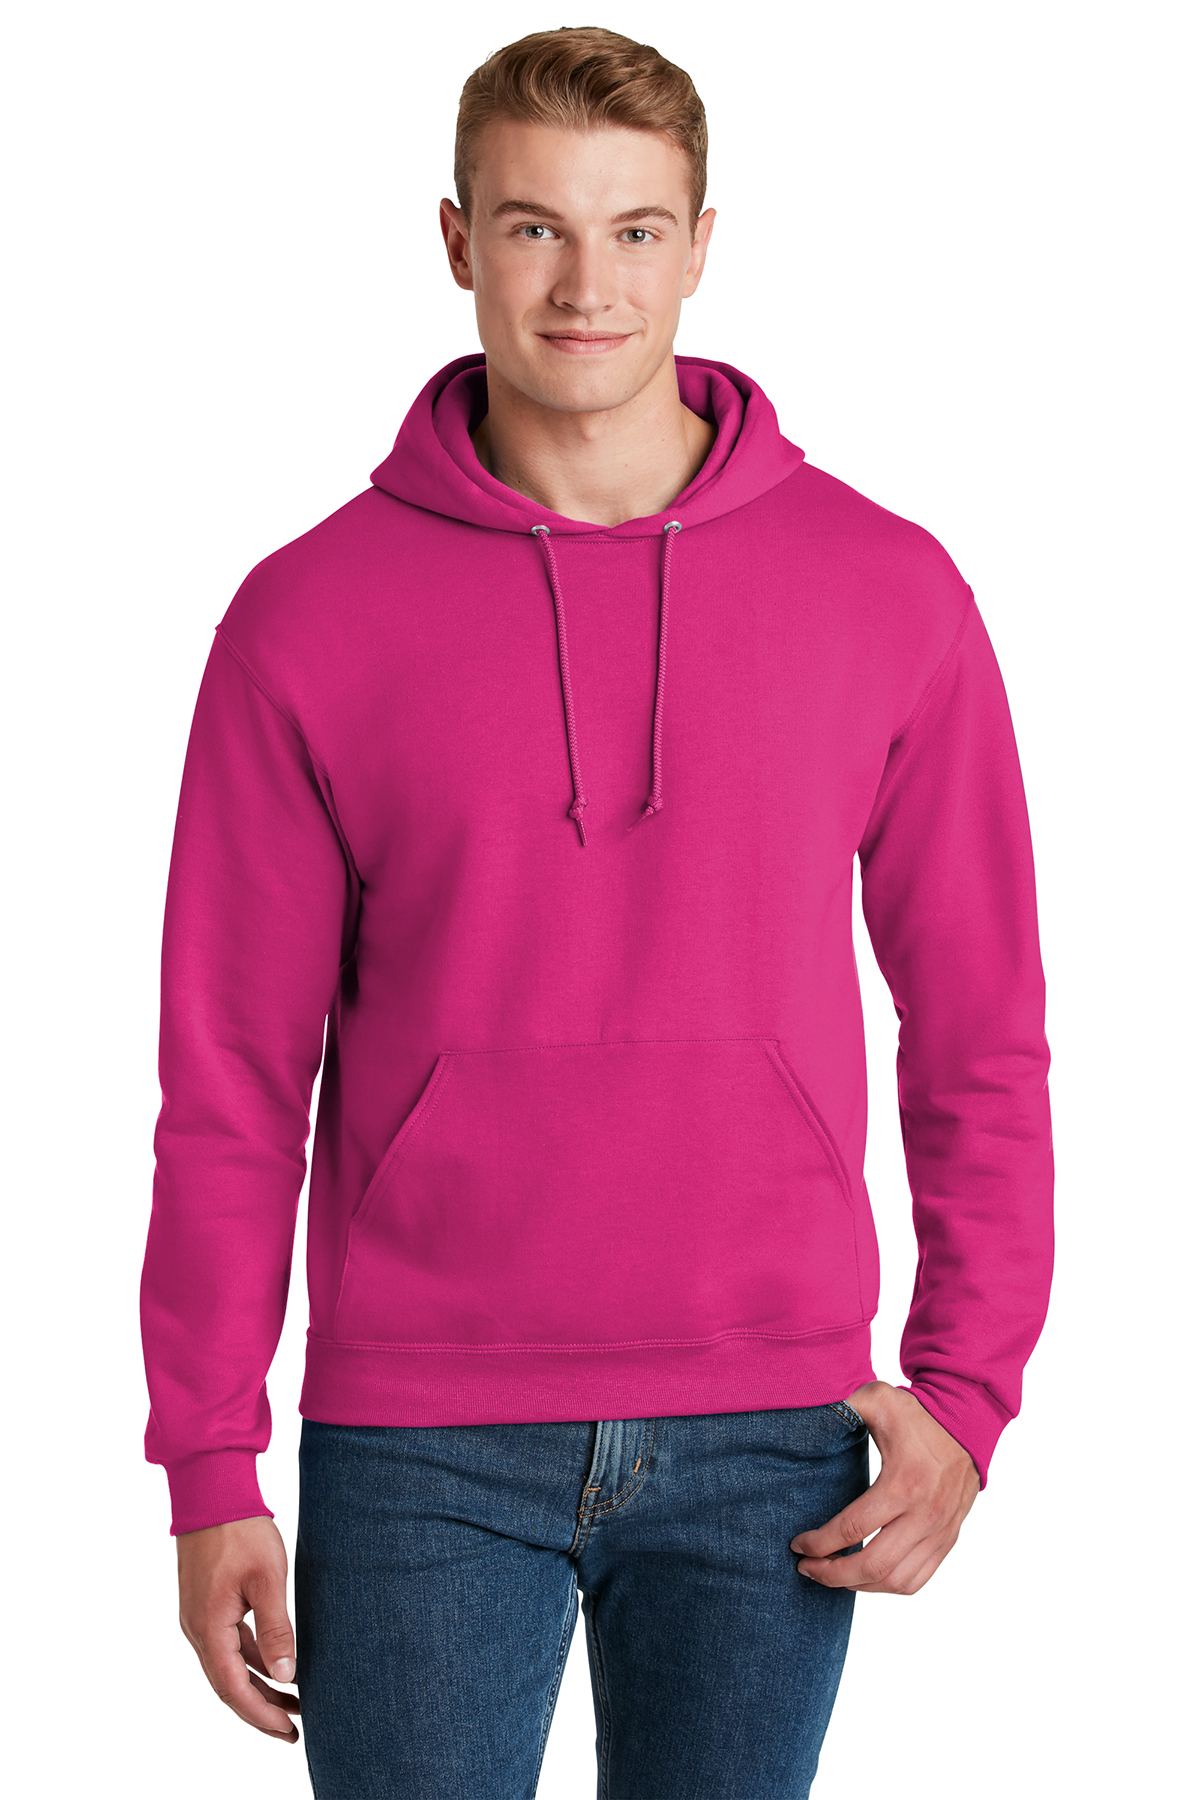 Jerzees - NuBlend Pullover Hooded Sweatshirt | Product | Company Casuals